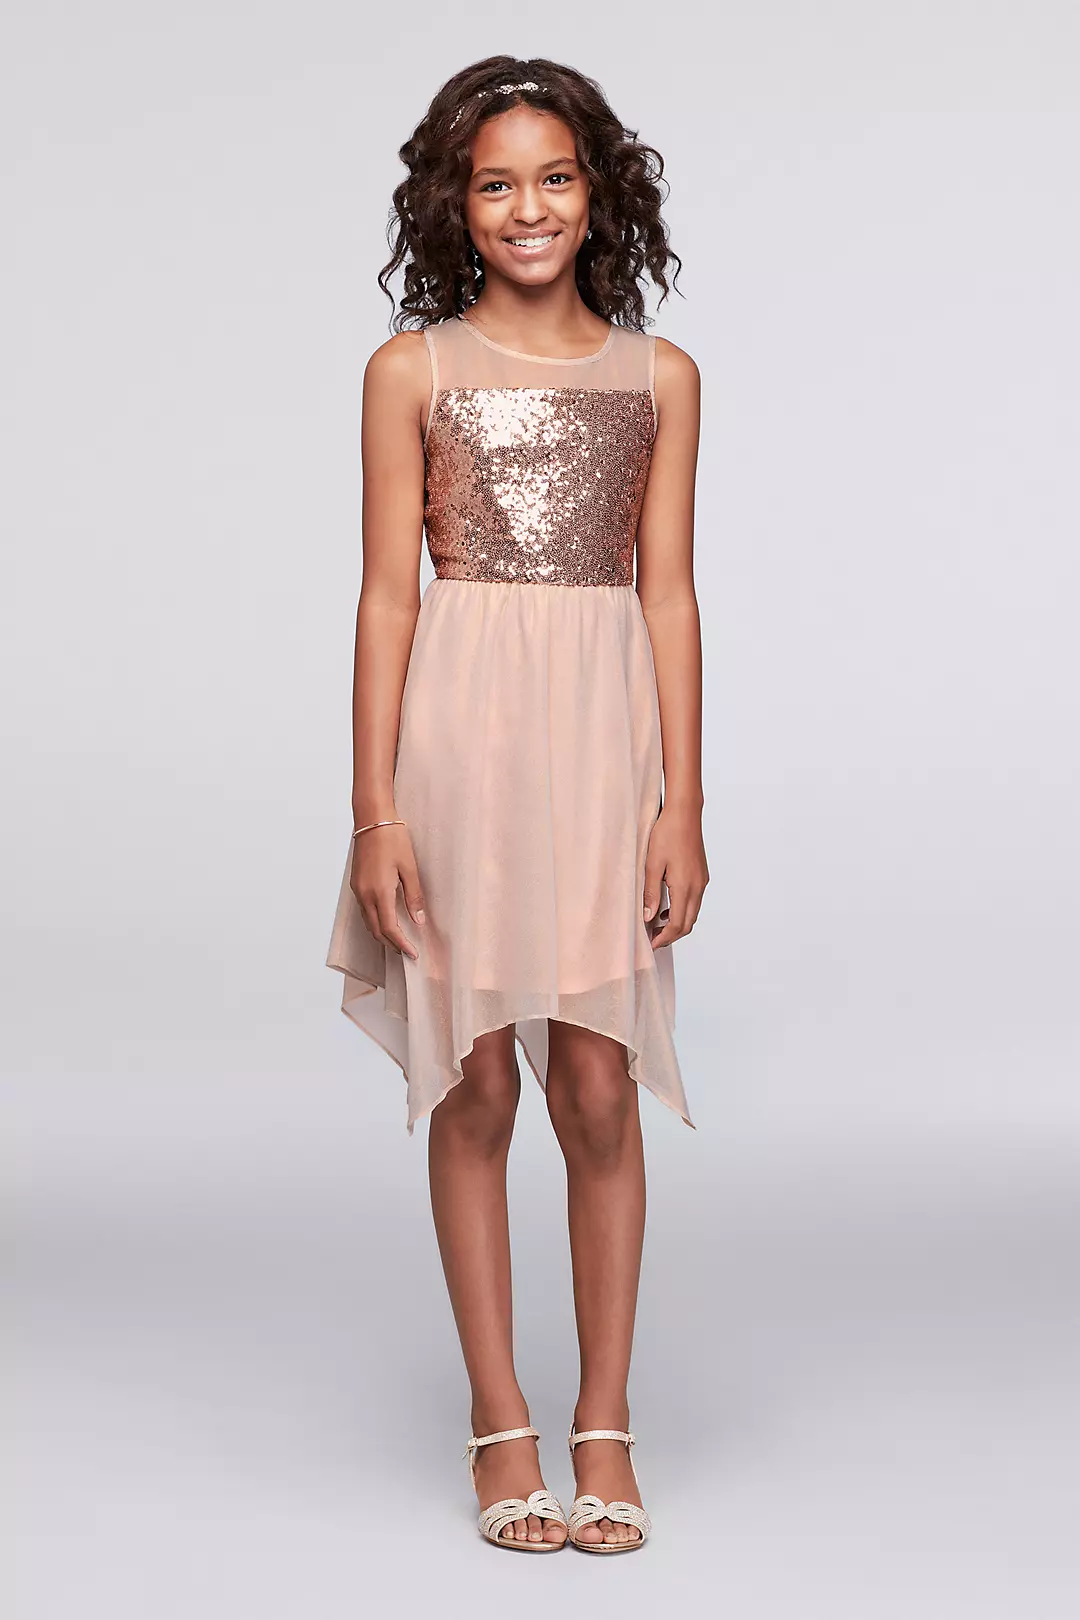 Sequined Illusion Party Dress with Metallic Skirt  Image